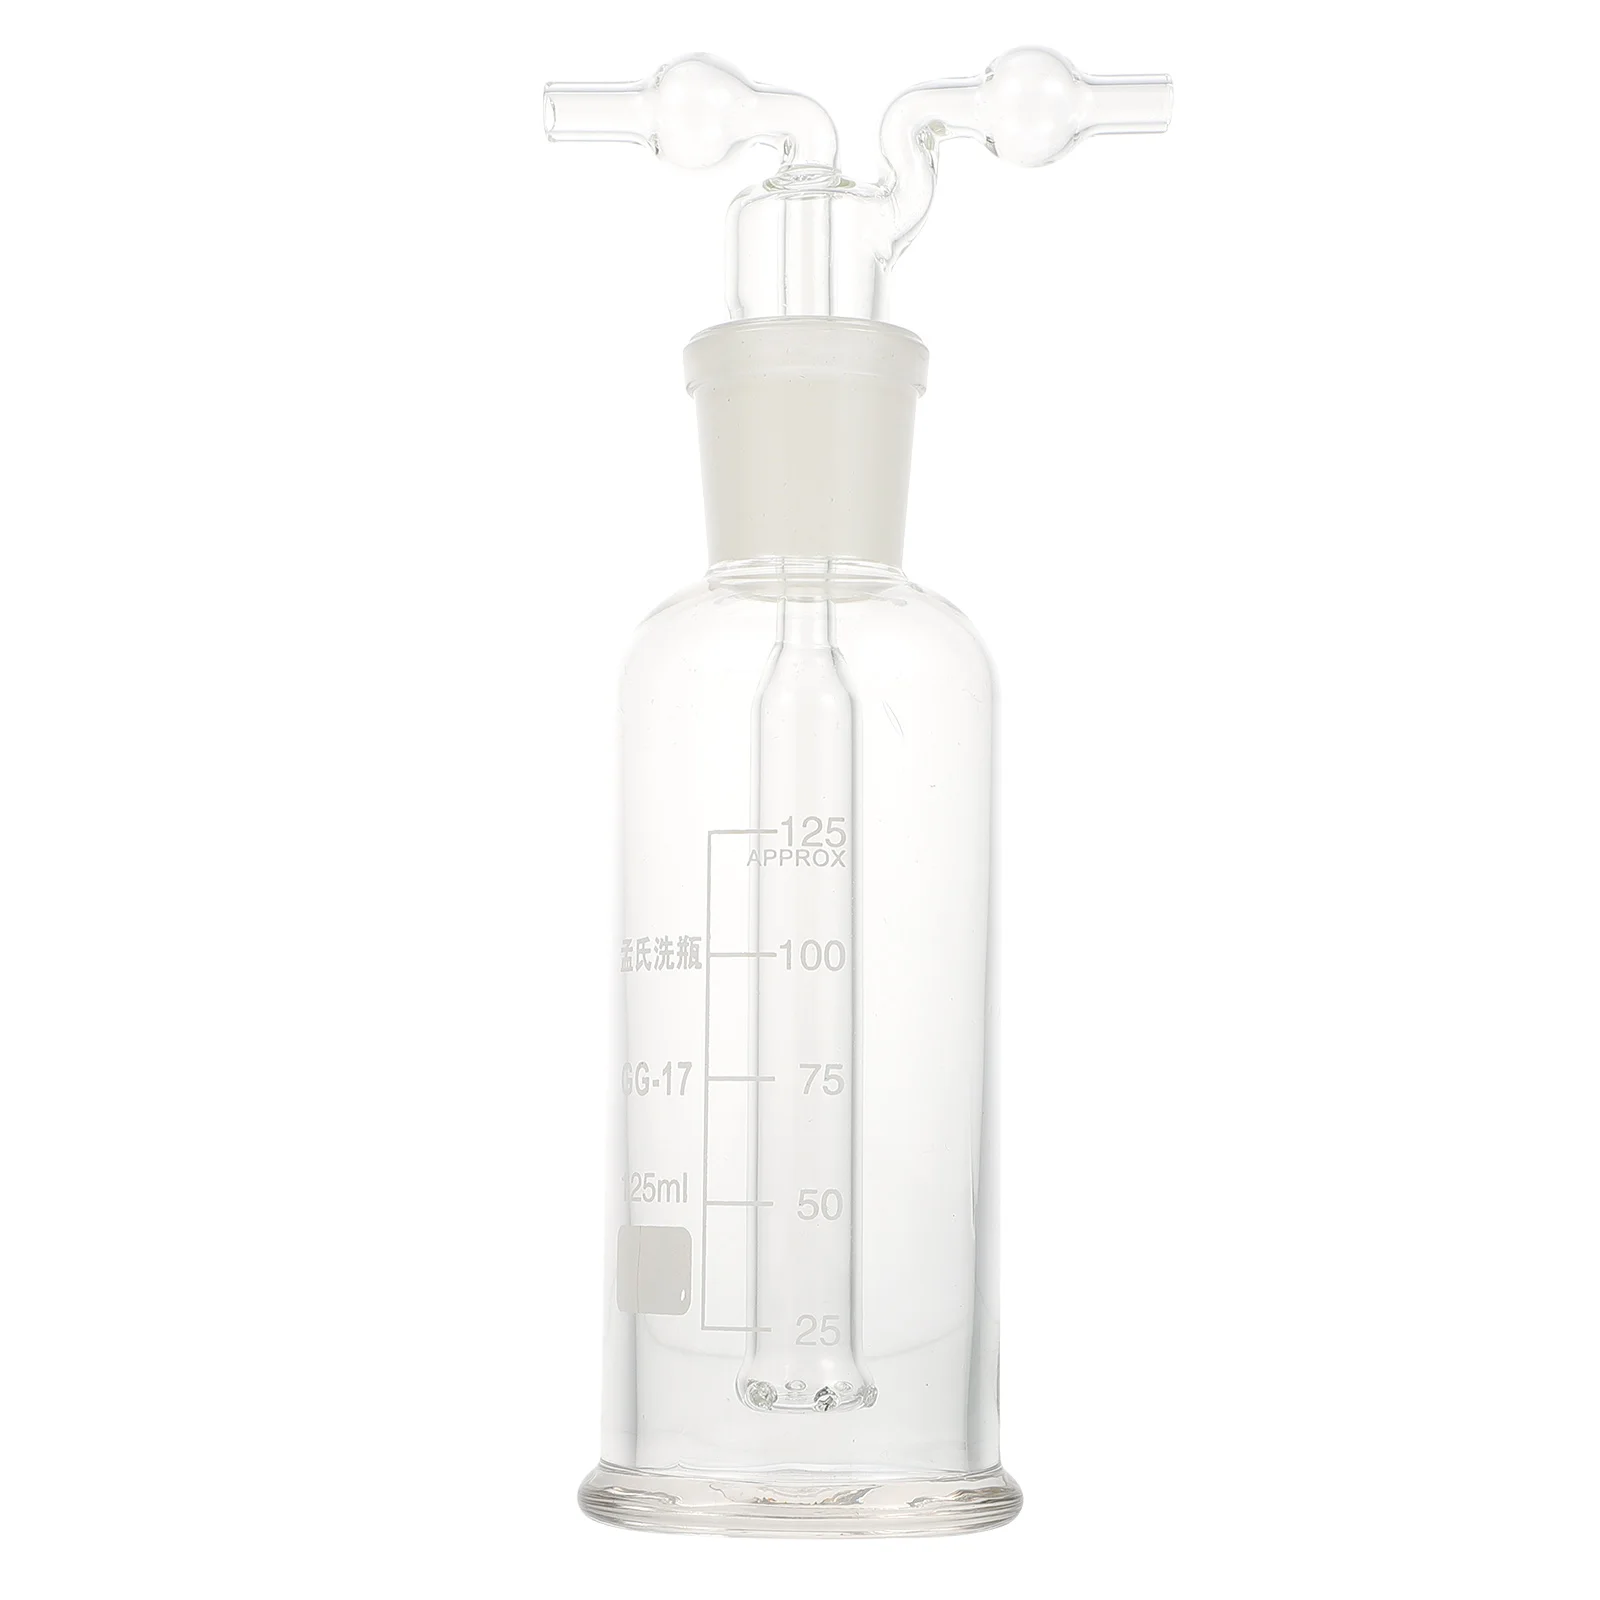 

Gas Cold Bottle Vacuum Lab Washing Wash Glass Glassware Oven Laboratory Instruments Equipment Bottles Accessories Supplies